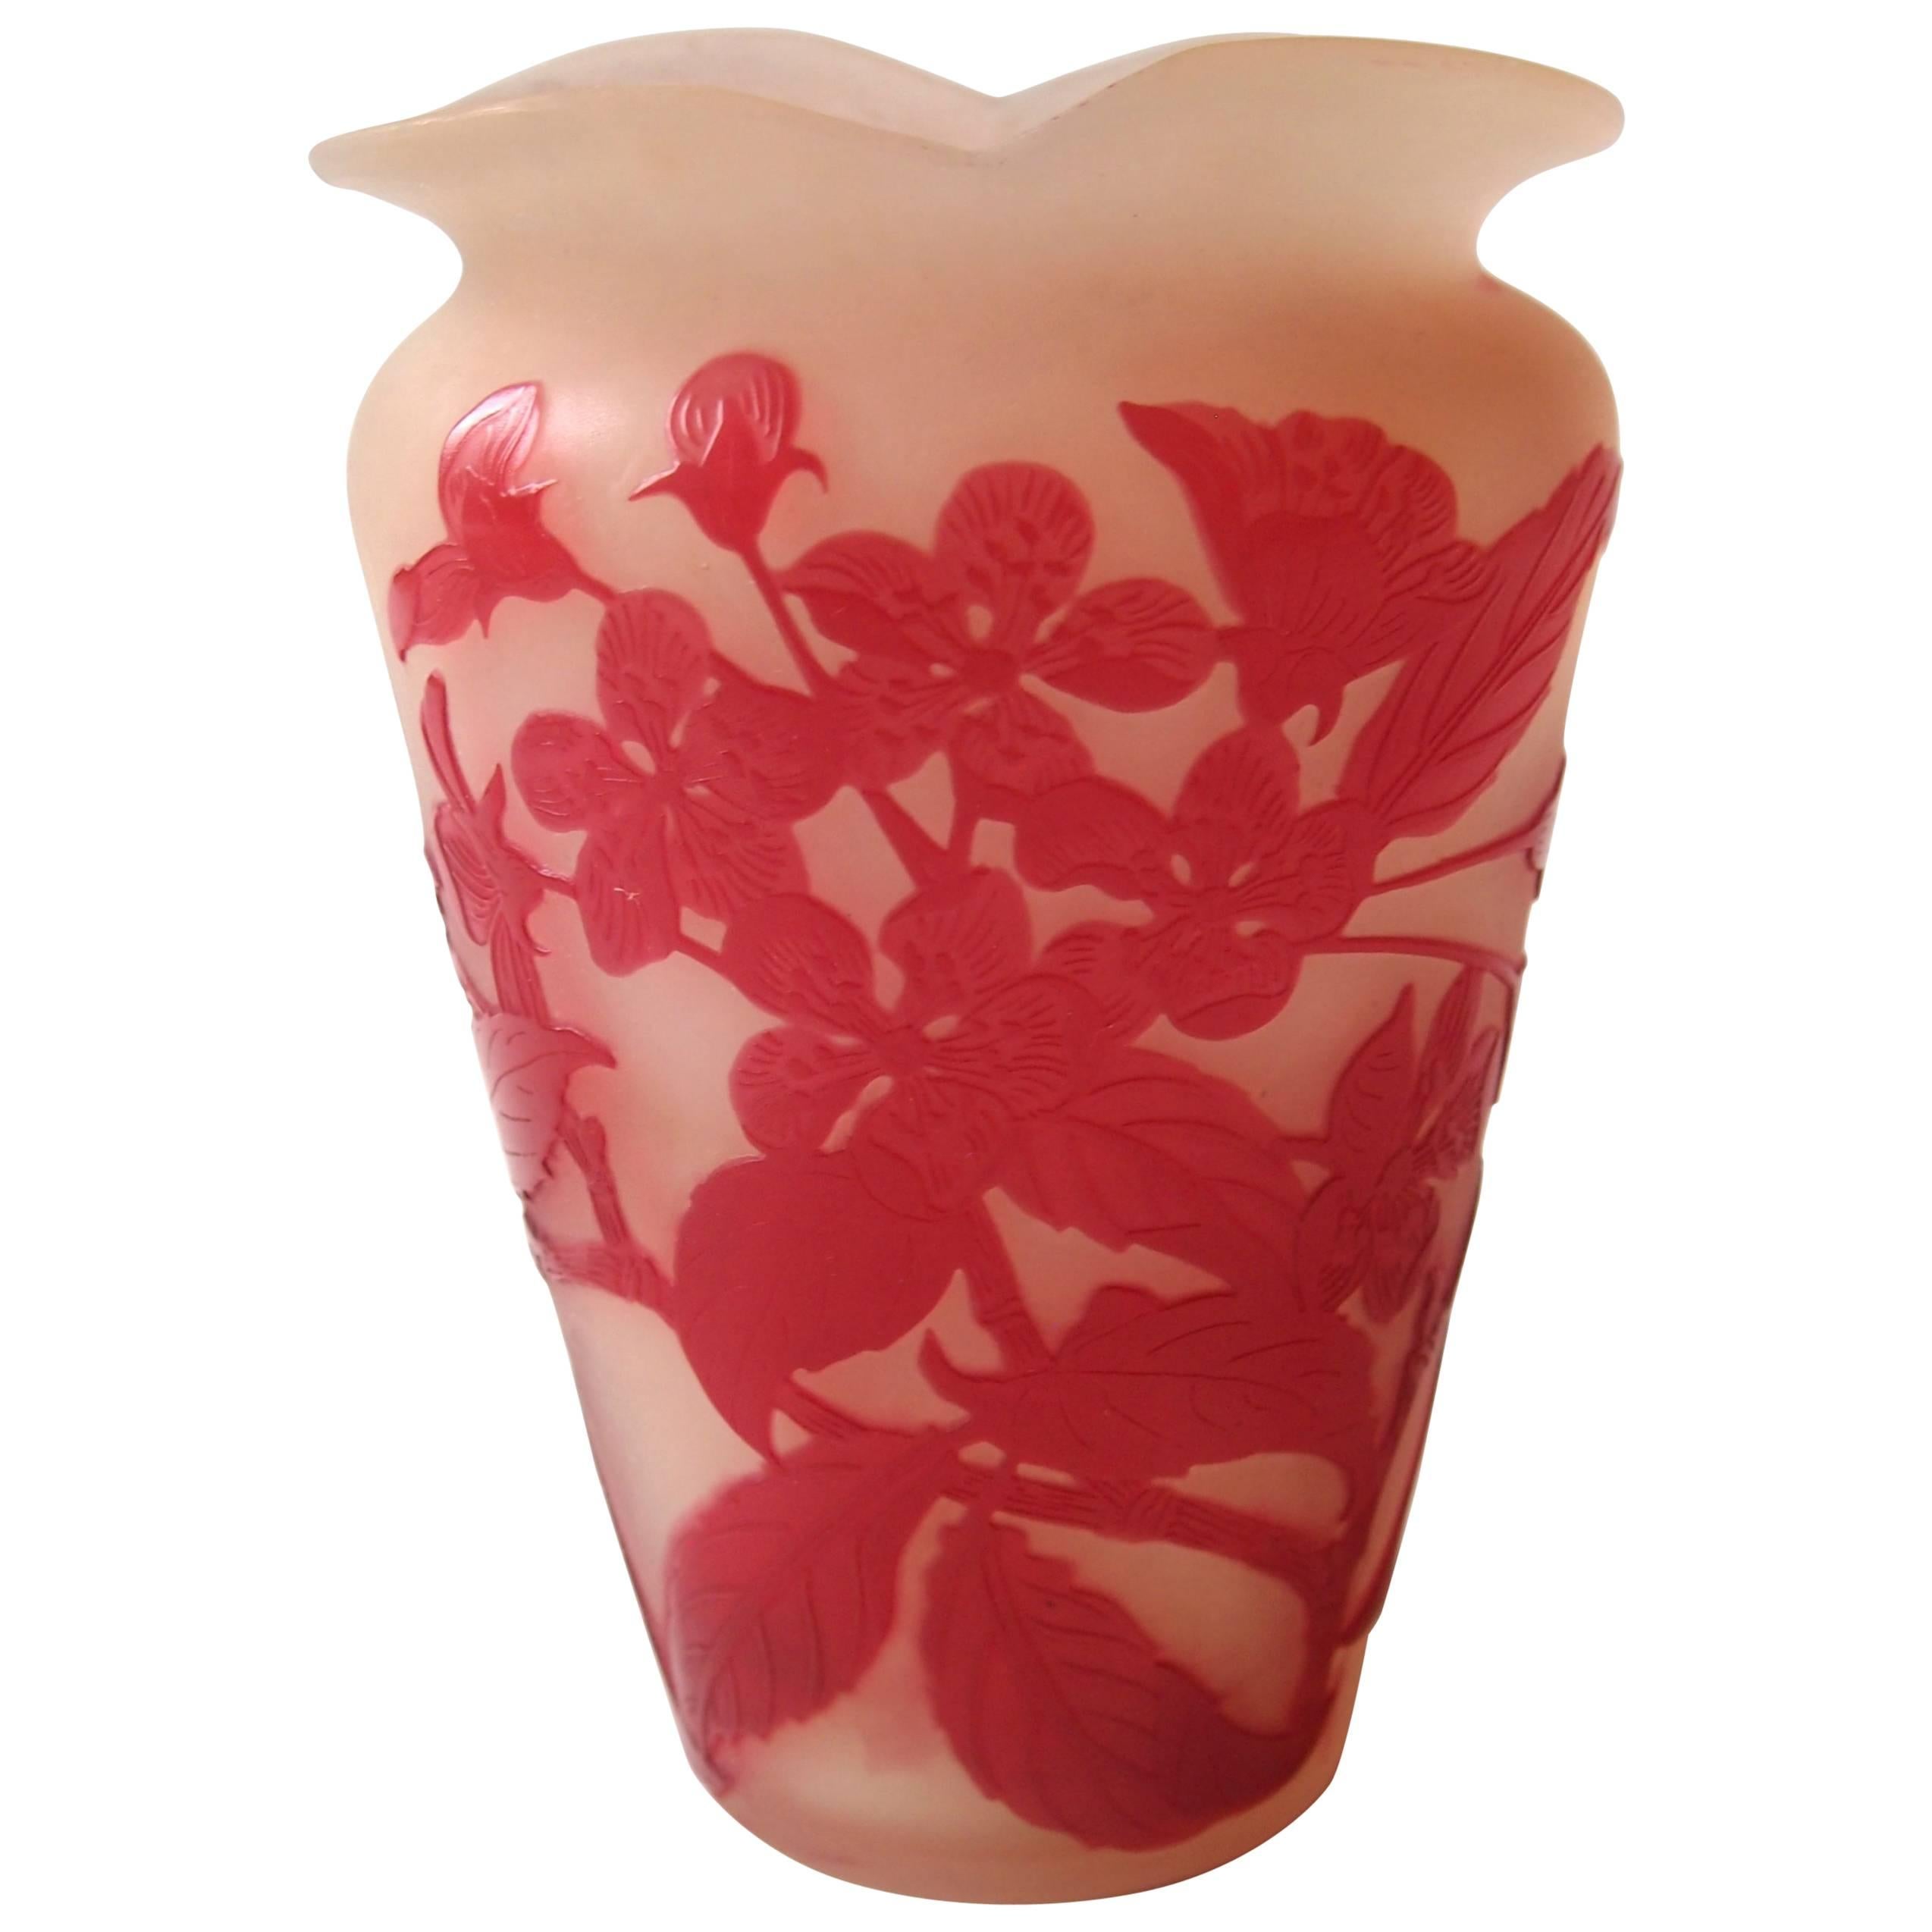 Emile Galle Art Nouveau Cameo Red and White Vase